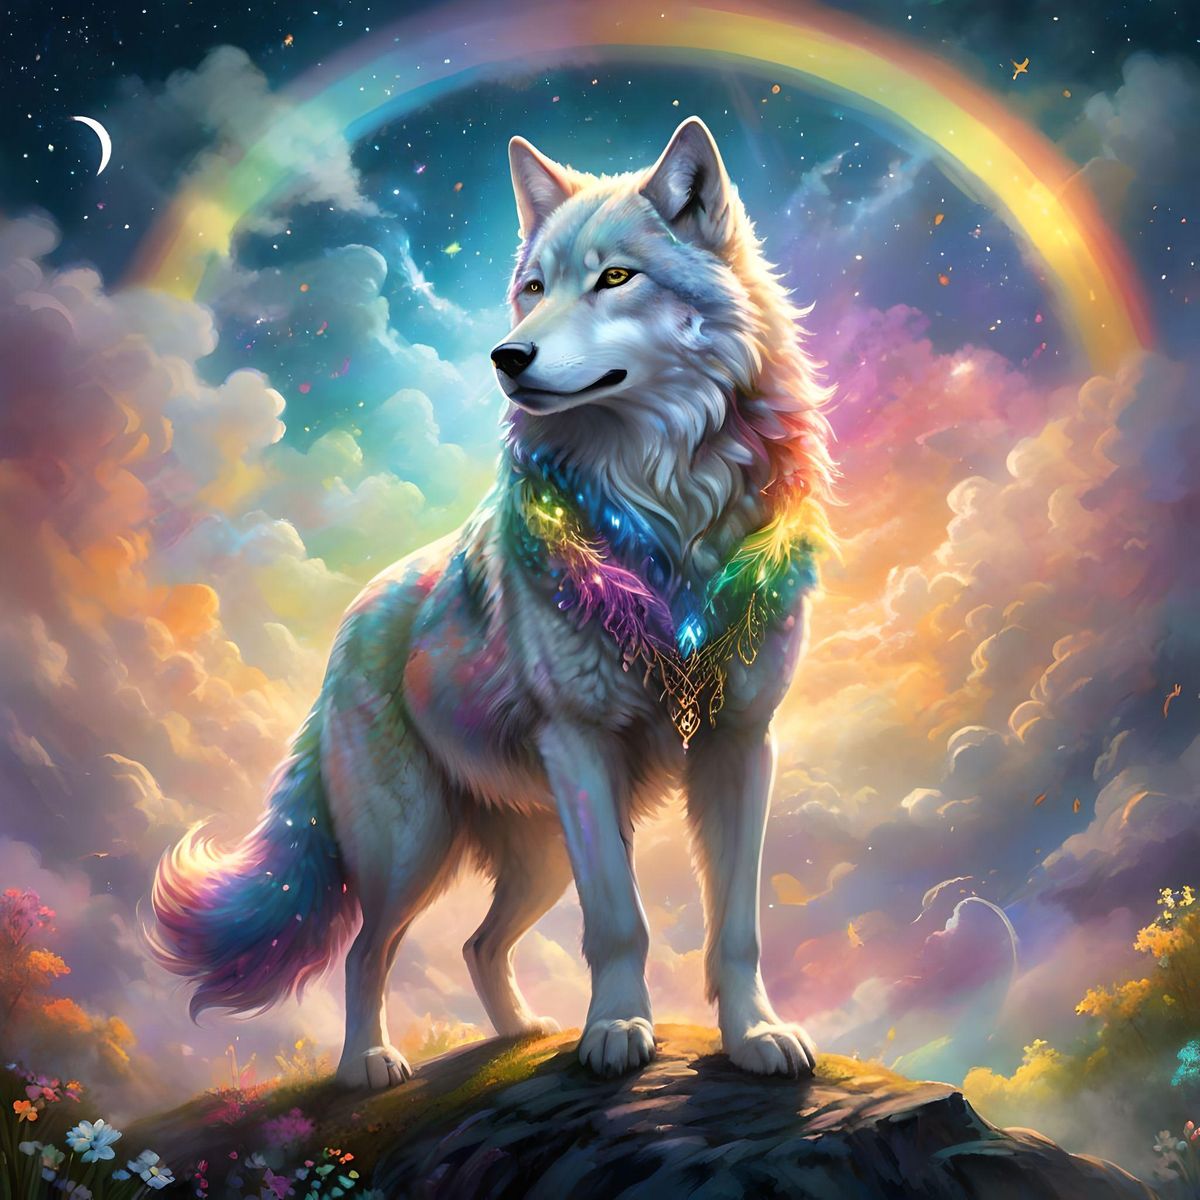 A serene and magical scene of a magical creature, wolf, gracefully prancing along a rainbow, with the ethereal glow of the full moon shining down upon it. The magical creature coat is a shimmering blend of opalescent pastels, reflecting the colors of the rainbow it walks upon. Its wolfs mane, adorned with sparkling silver and gold filigree, gently sways back and forth as it moves. The rainbow, arching gracefully across the sky, seems to touch the very tips of the clouds, creating a breathtaking display of color and light. The moon, hanging low in the heavens, casts a soft, silvery glow over the landscape, illuminating the tips of the rainbow and the fluffy white clouds below. A sense of peace and wonder permeates the air, as if the magical creature presence alone brings forth the magic of the moonlit night.